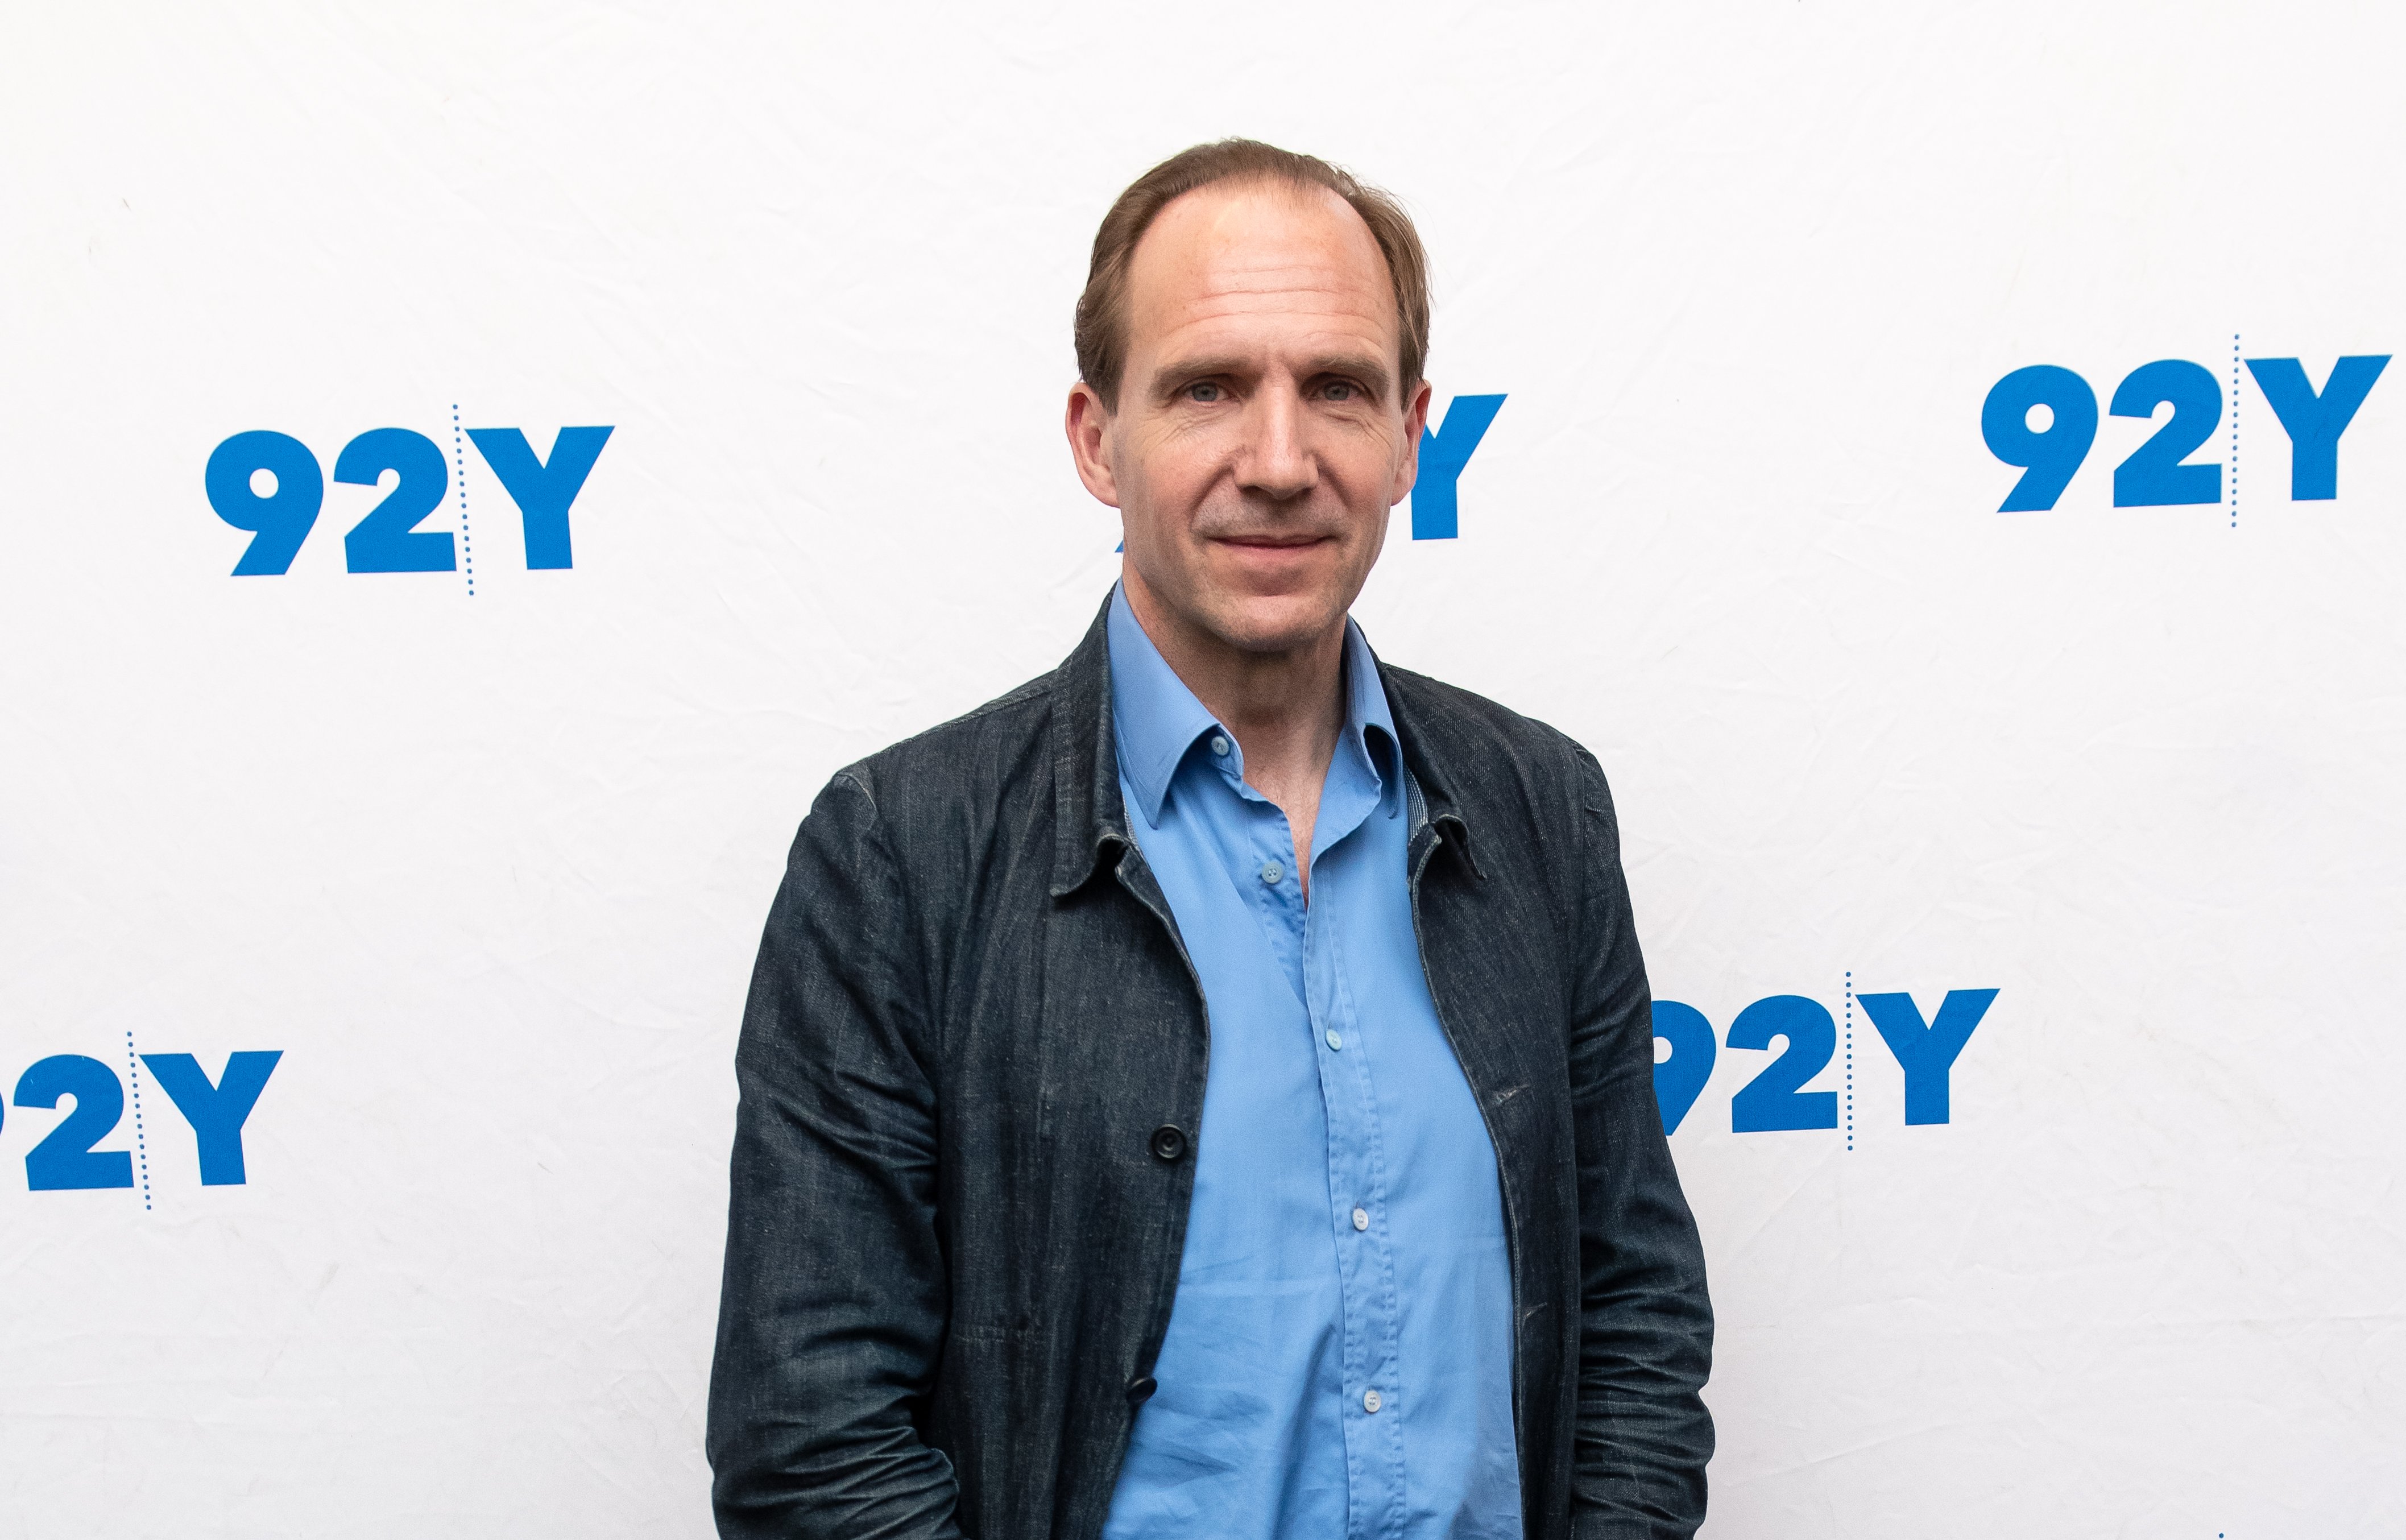 Ralph Fiennes visits 92Y to discuss "The White Crow" at Kaufman Concert Hall on April 21, 2019, in New York City. | Source: Getty Images